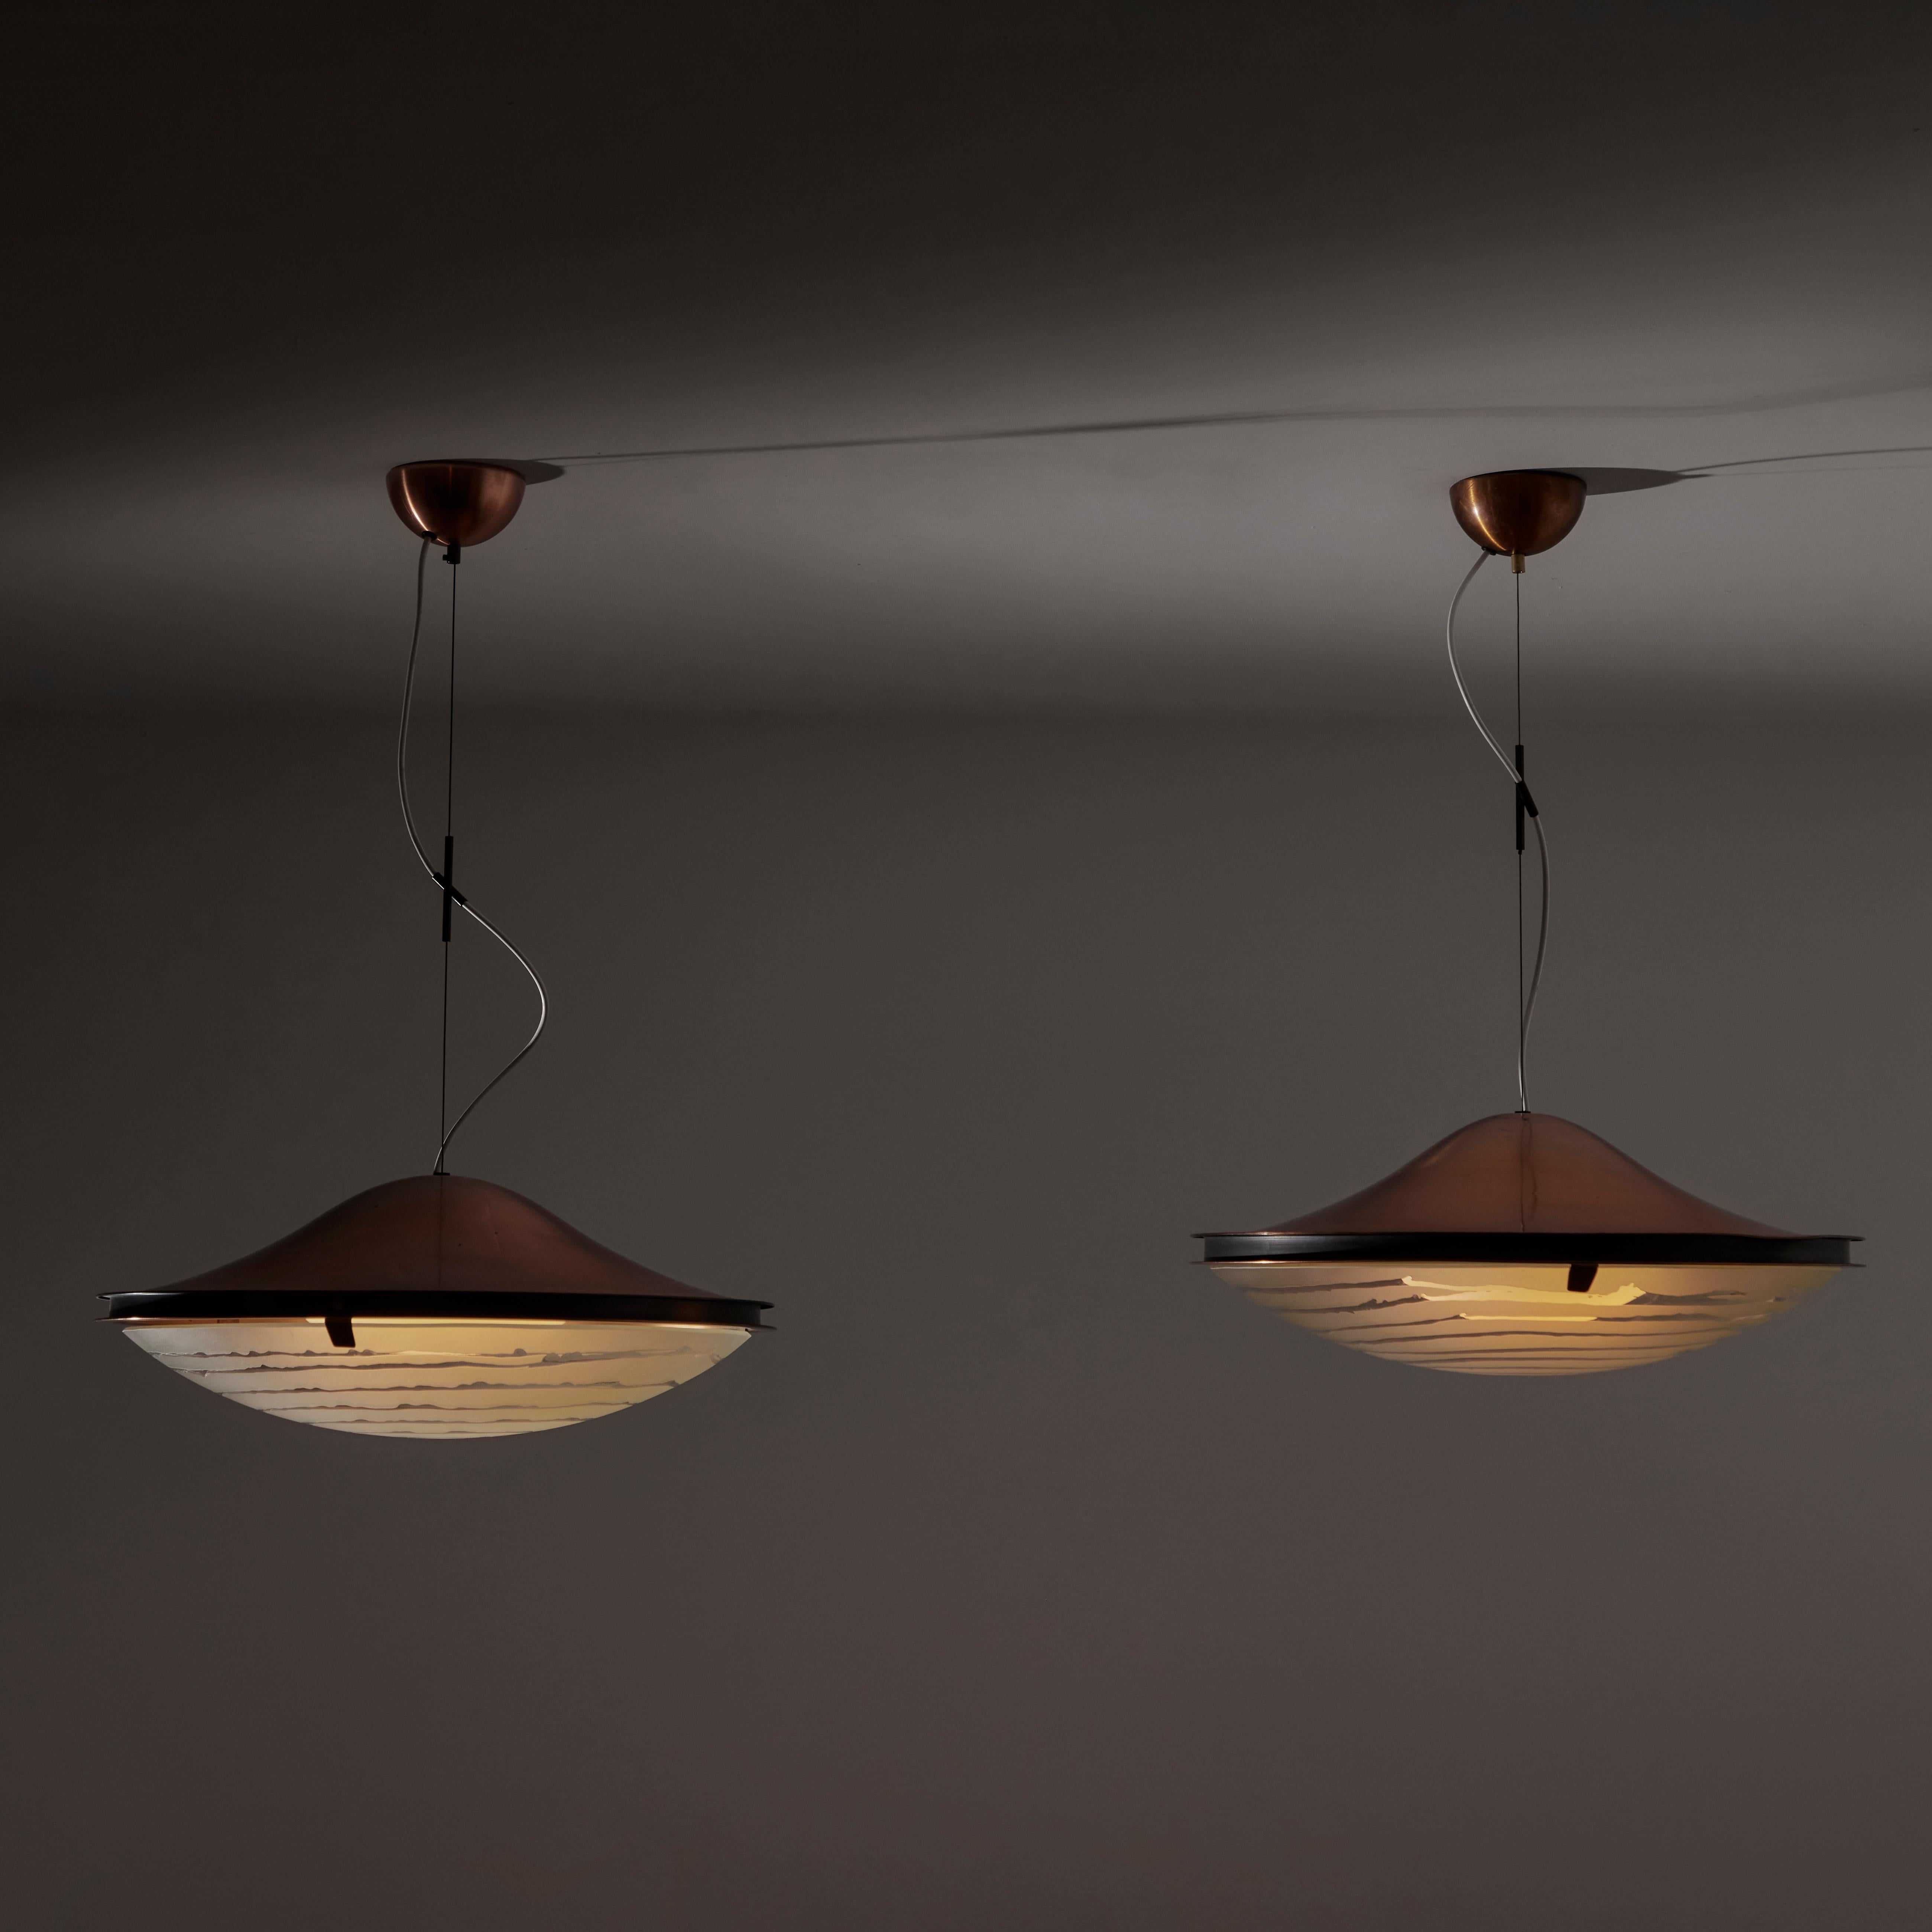 Ceiling lights by Gaetano Sciolari for Stilnovo. Designed and manufactured in Italy, circa 1950. Aluminum frame with anodized copper finish, featuring a unique etched spiral within the frosted glass shade that encloses an opaline white diffuser